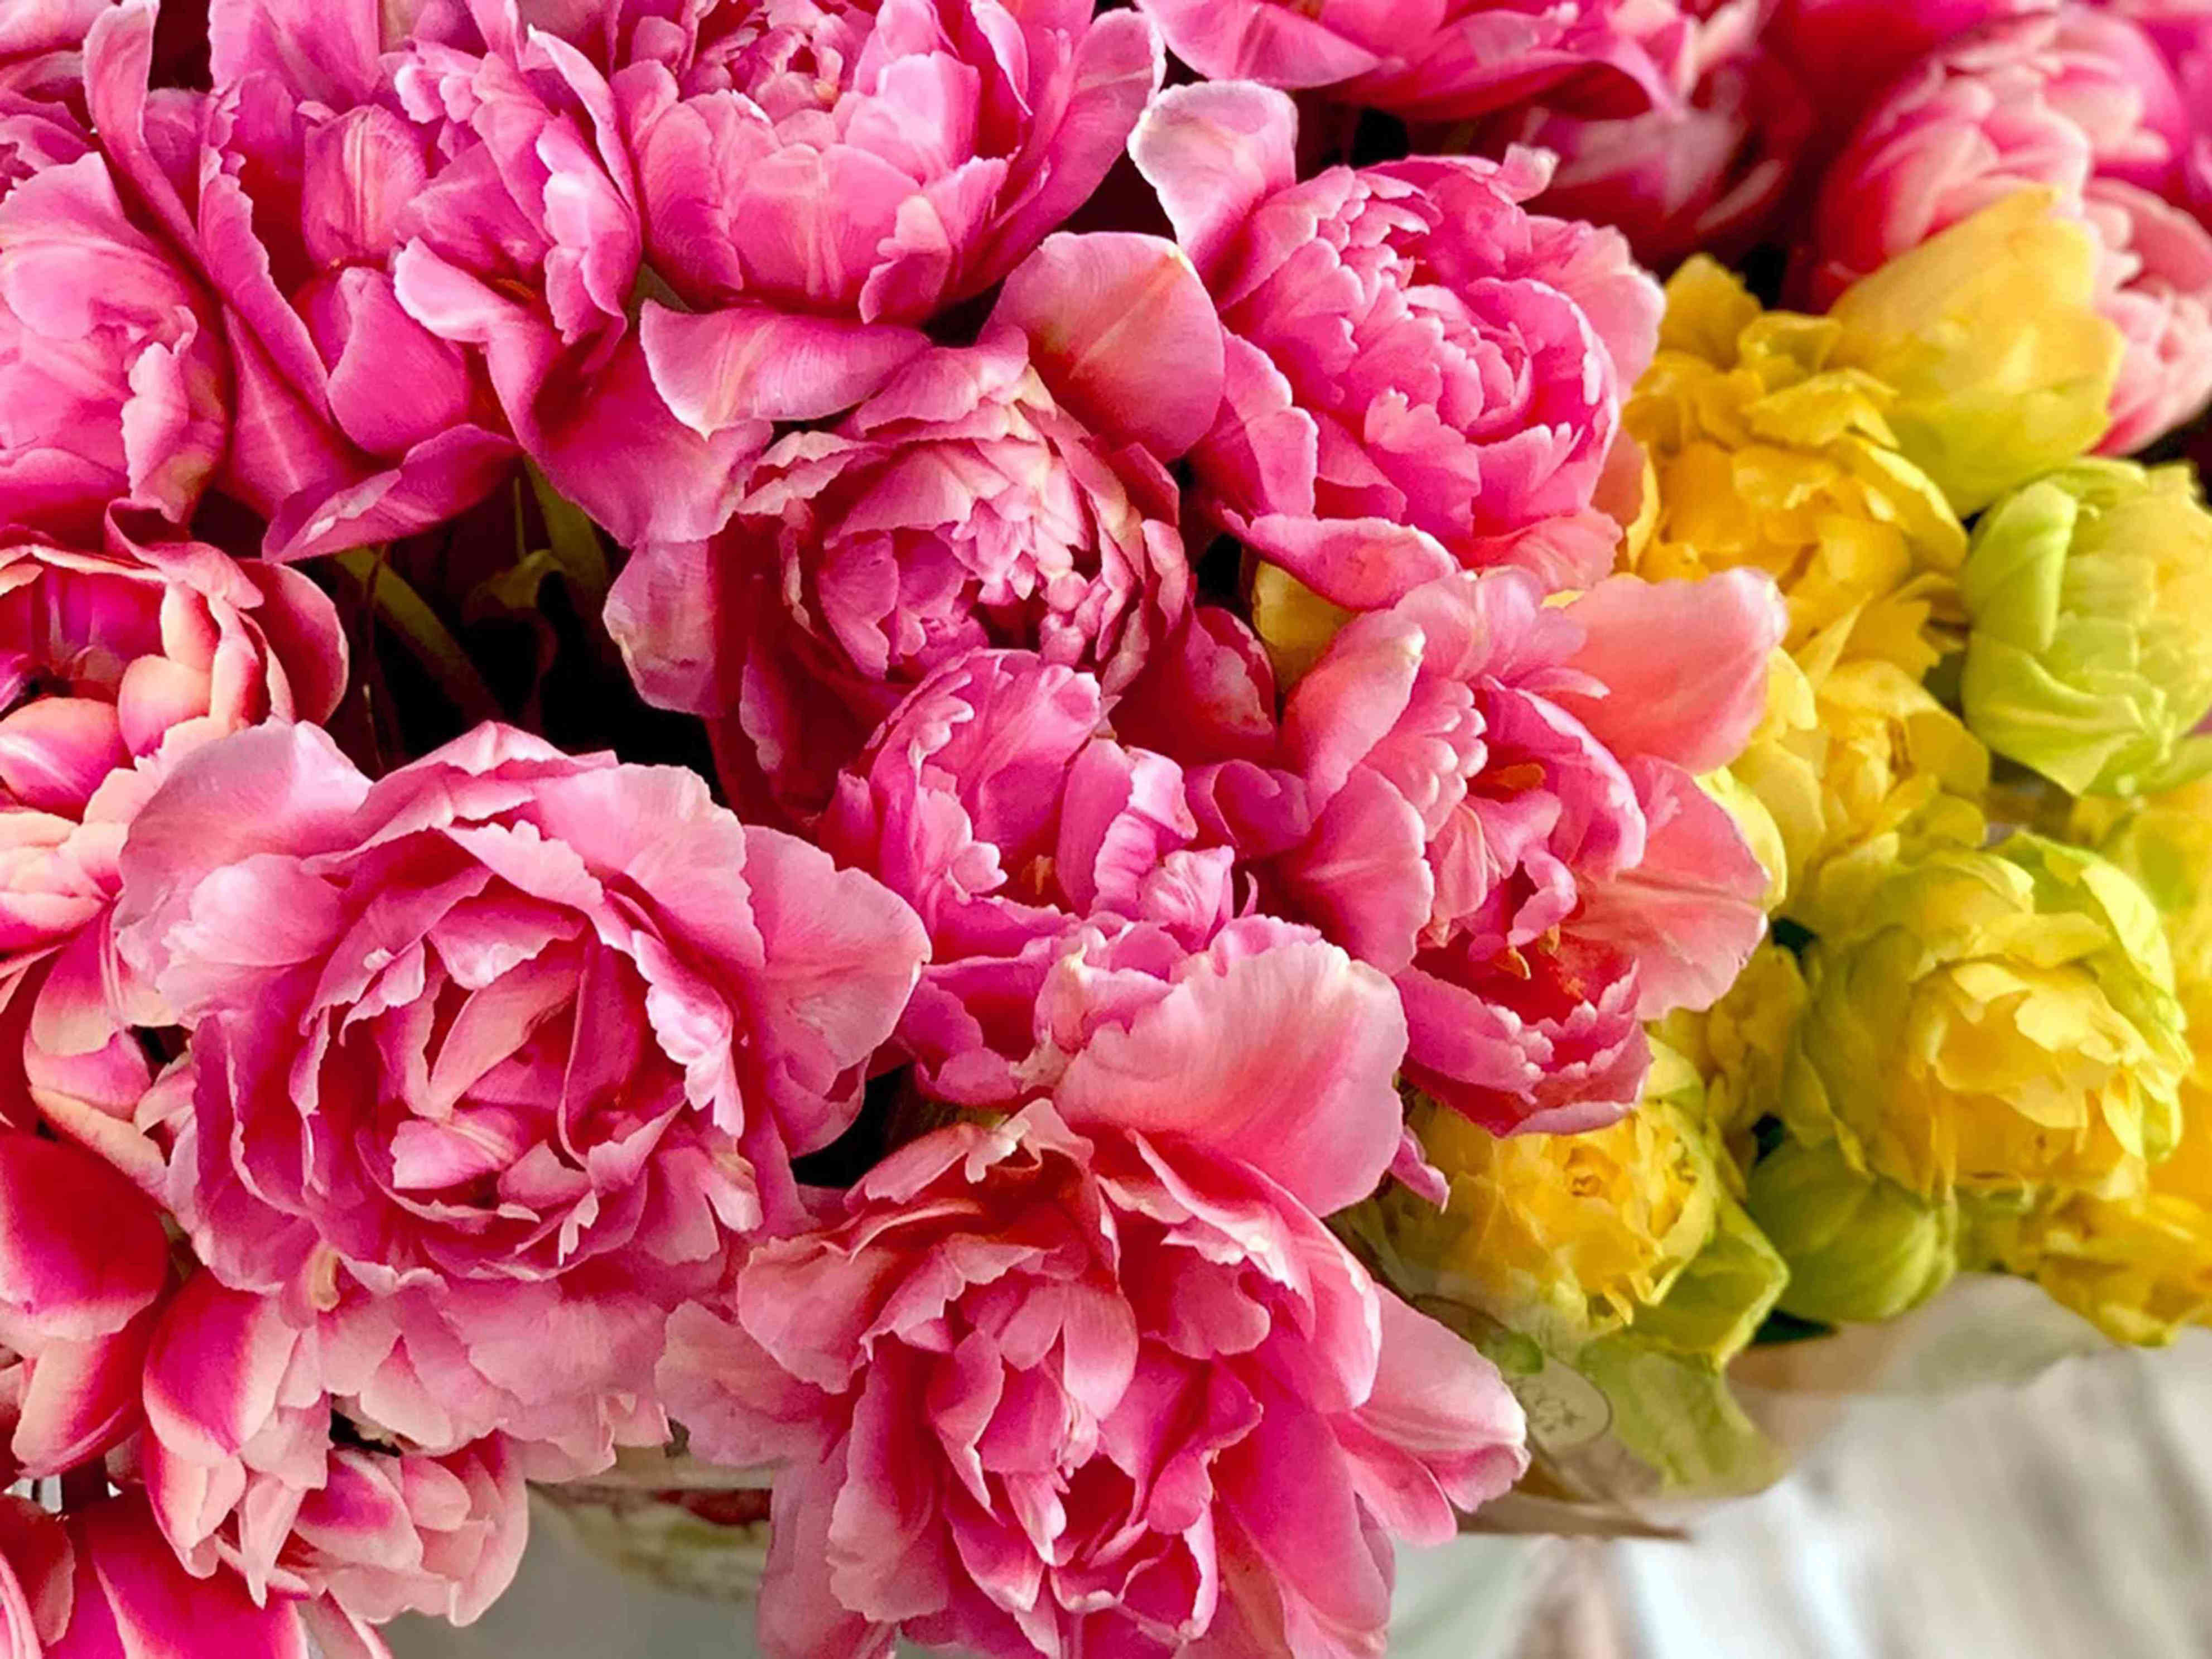 They May Not Be In Season, But You Can Still Get Your Peony Fix at ...